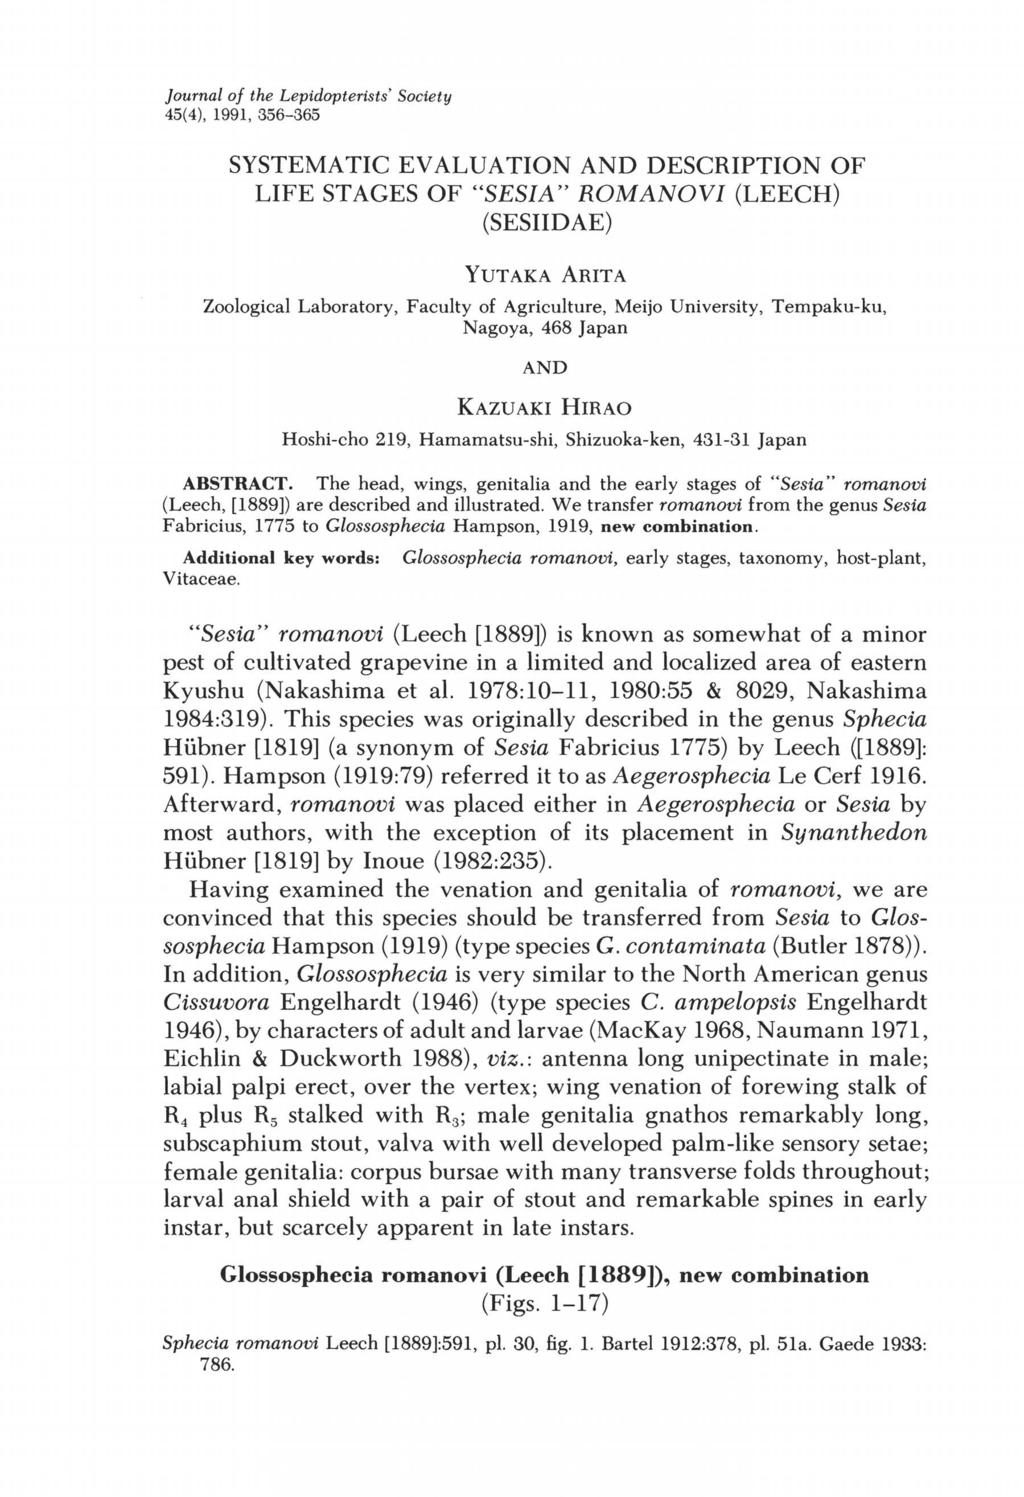 Journal of the Lepidopterists' Society 45(4), 1991,356-365 SYSTEMATIC EVALUATION AND DESCRIPTION OF LIFE STAGES OF "SESIA" ROMANOVI (LEECH) (SESIIDAE) YUT AKA ARIT A Zoological Laboratory, Faculty of